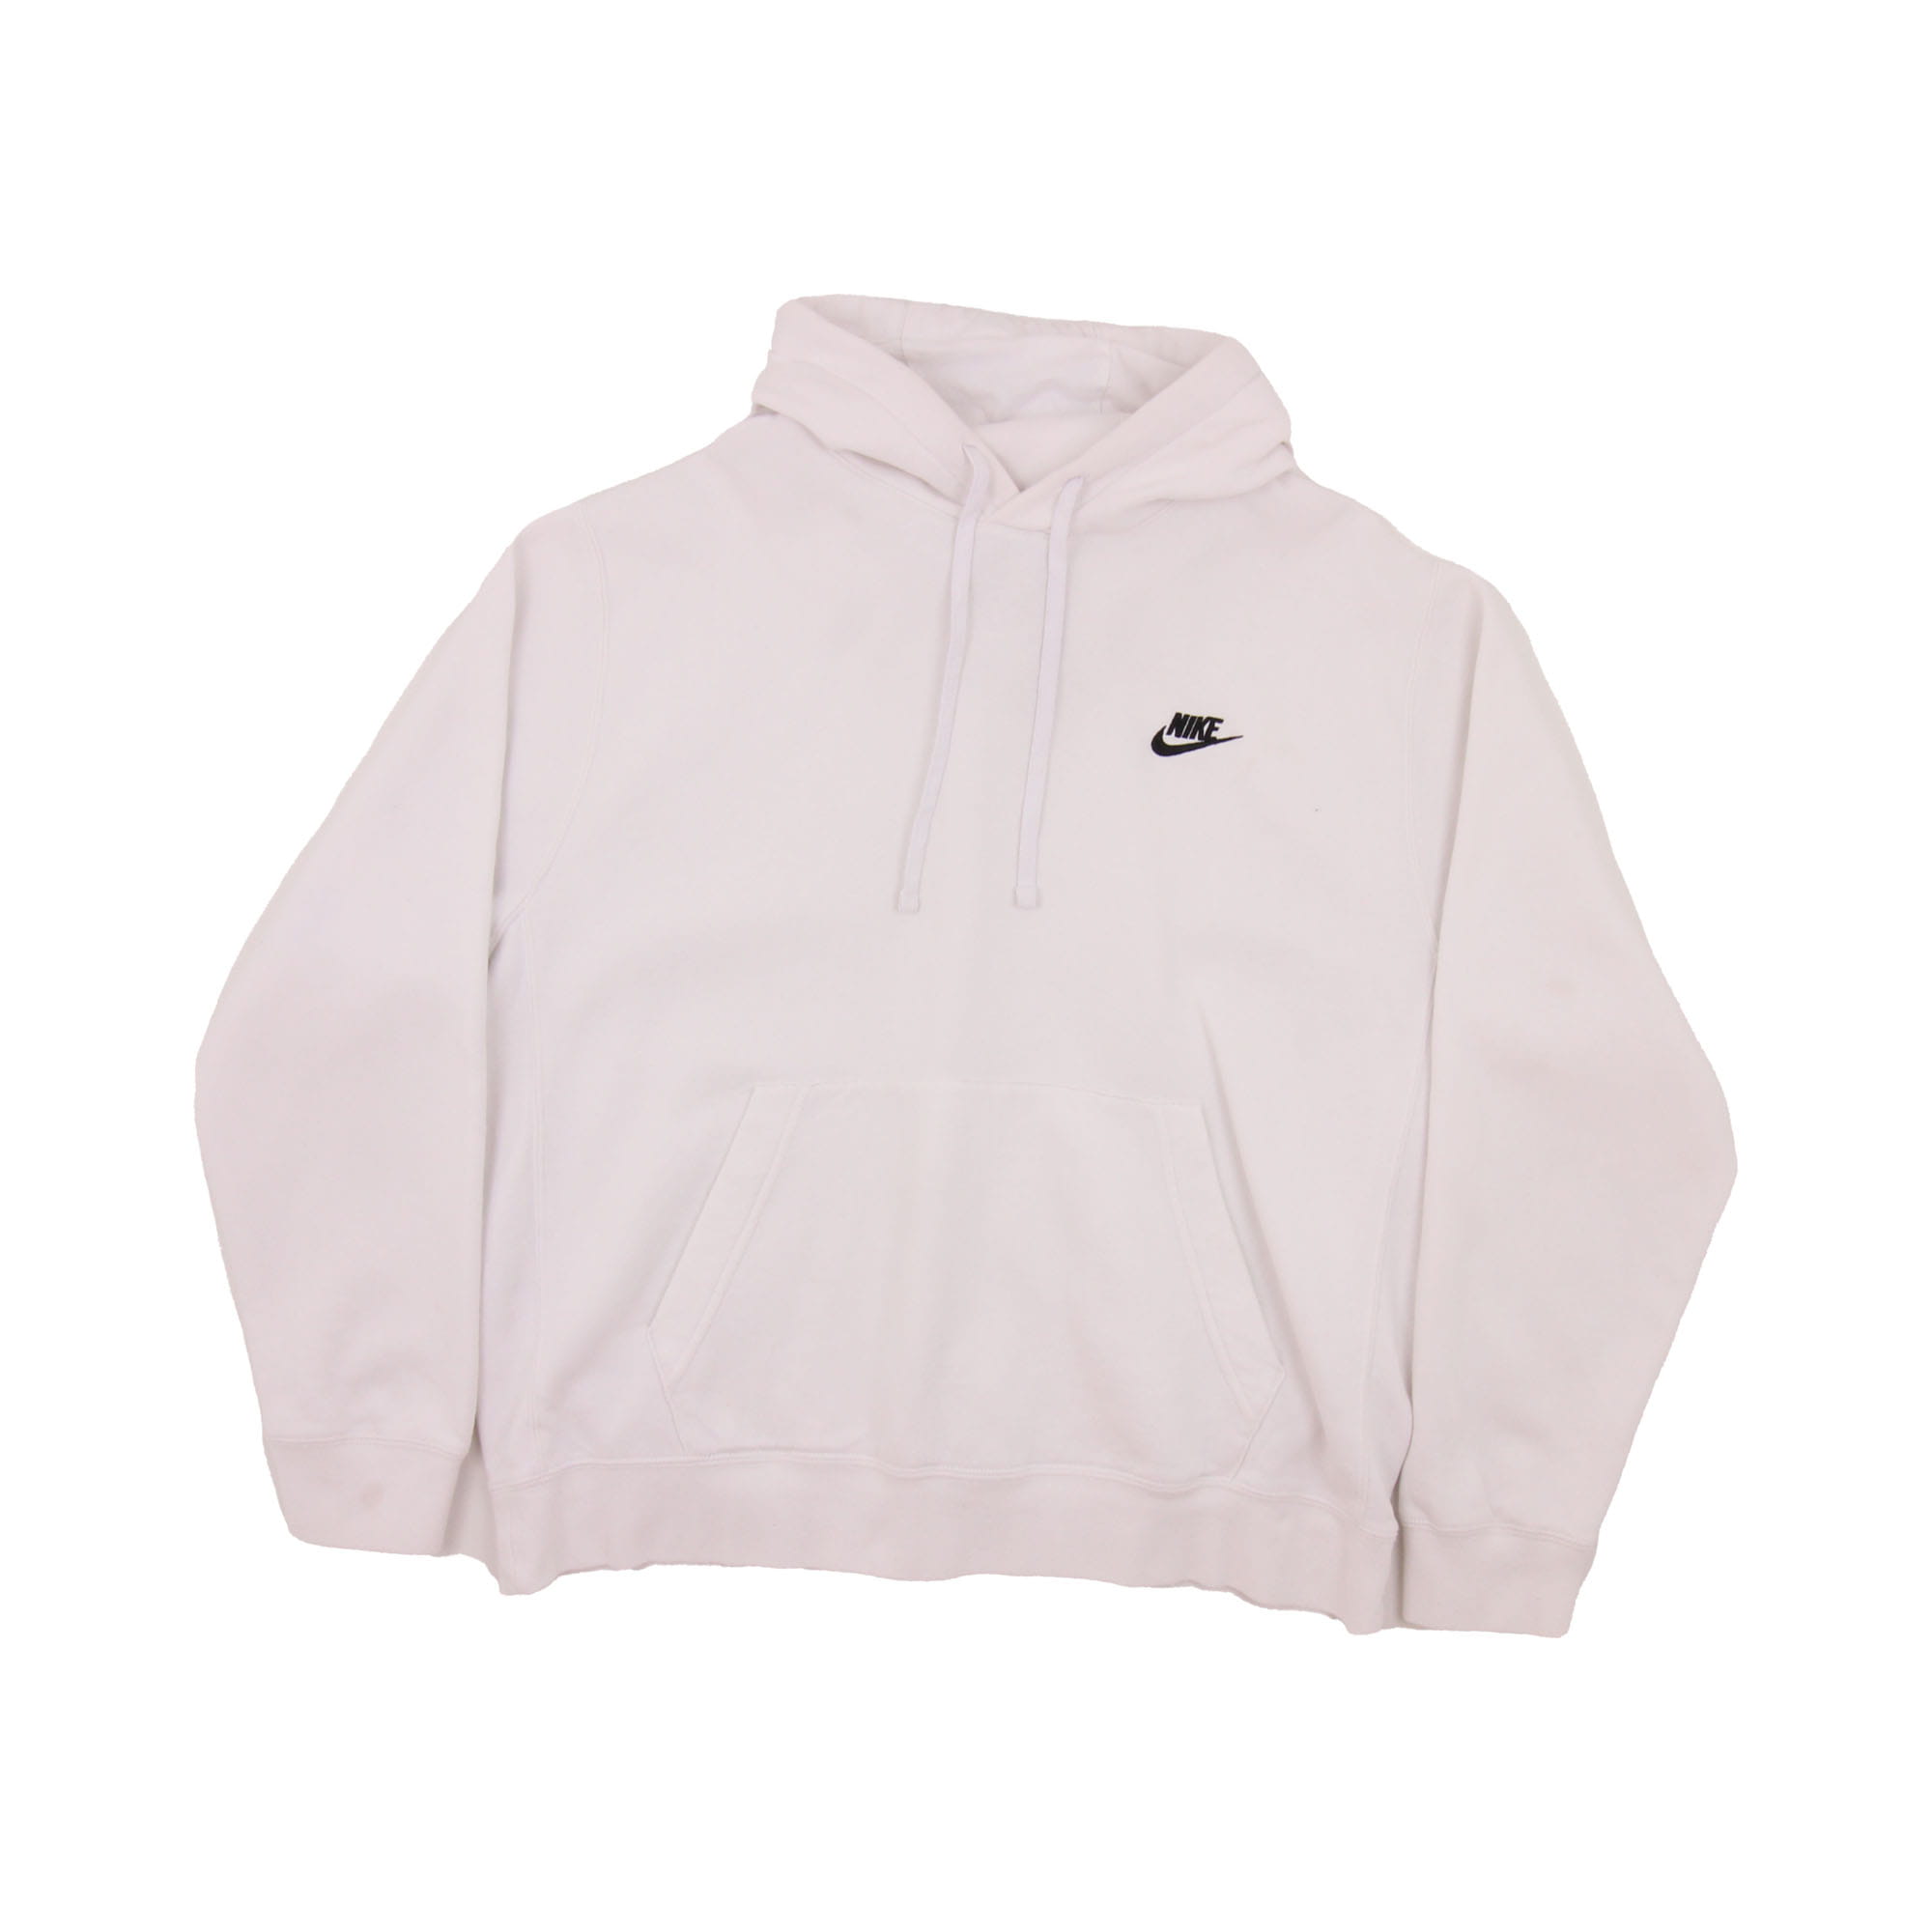 Nike Embroidered Logo Hoodie -  M/L